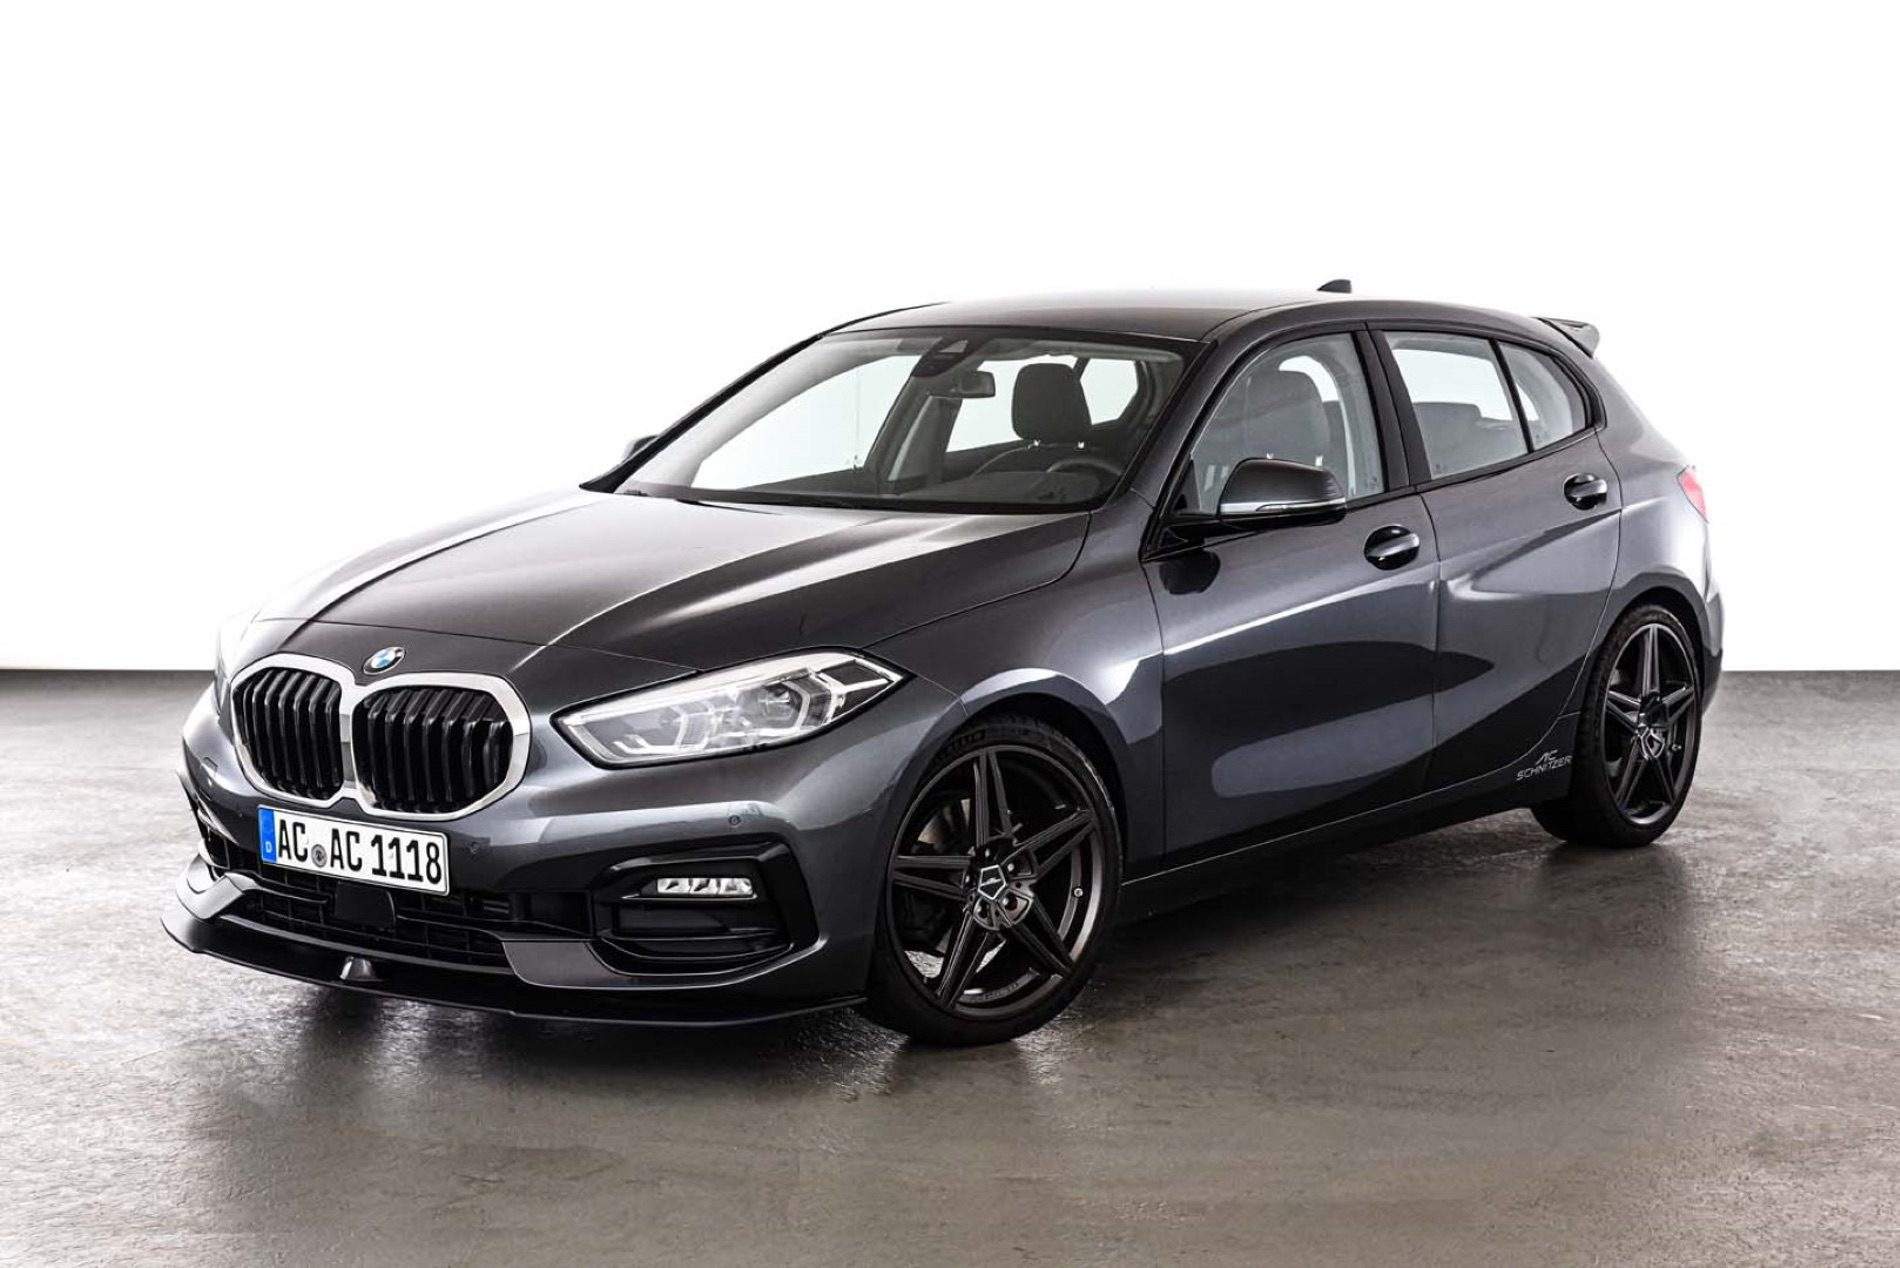 New BMW 1 Series F40 gets tuned by AC Schnitzer